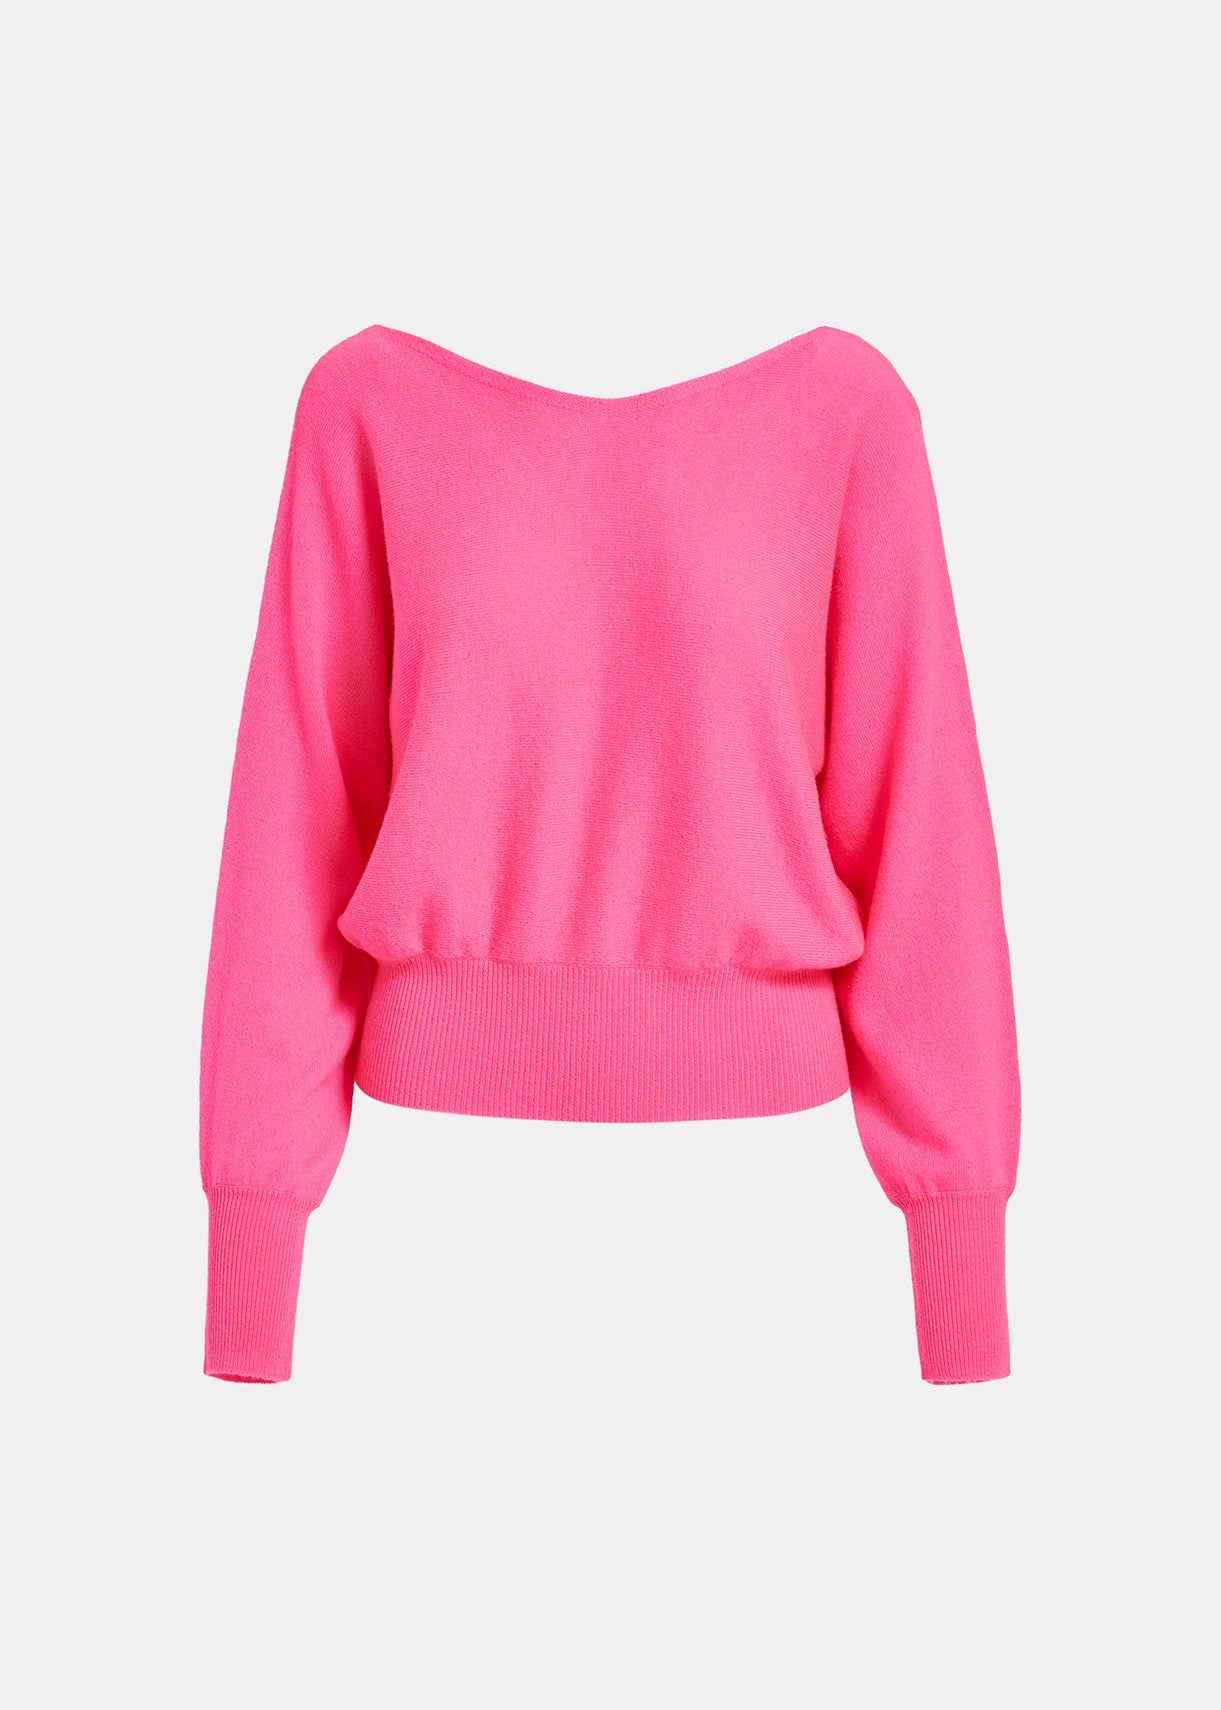 An Epinal Sweater - High Voltage made of merino wool with a ruffled sleeve by Essentiel Antwerp.